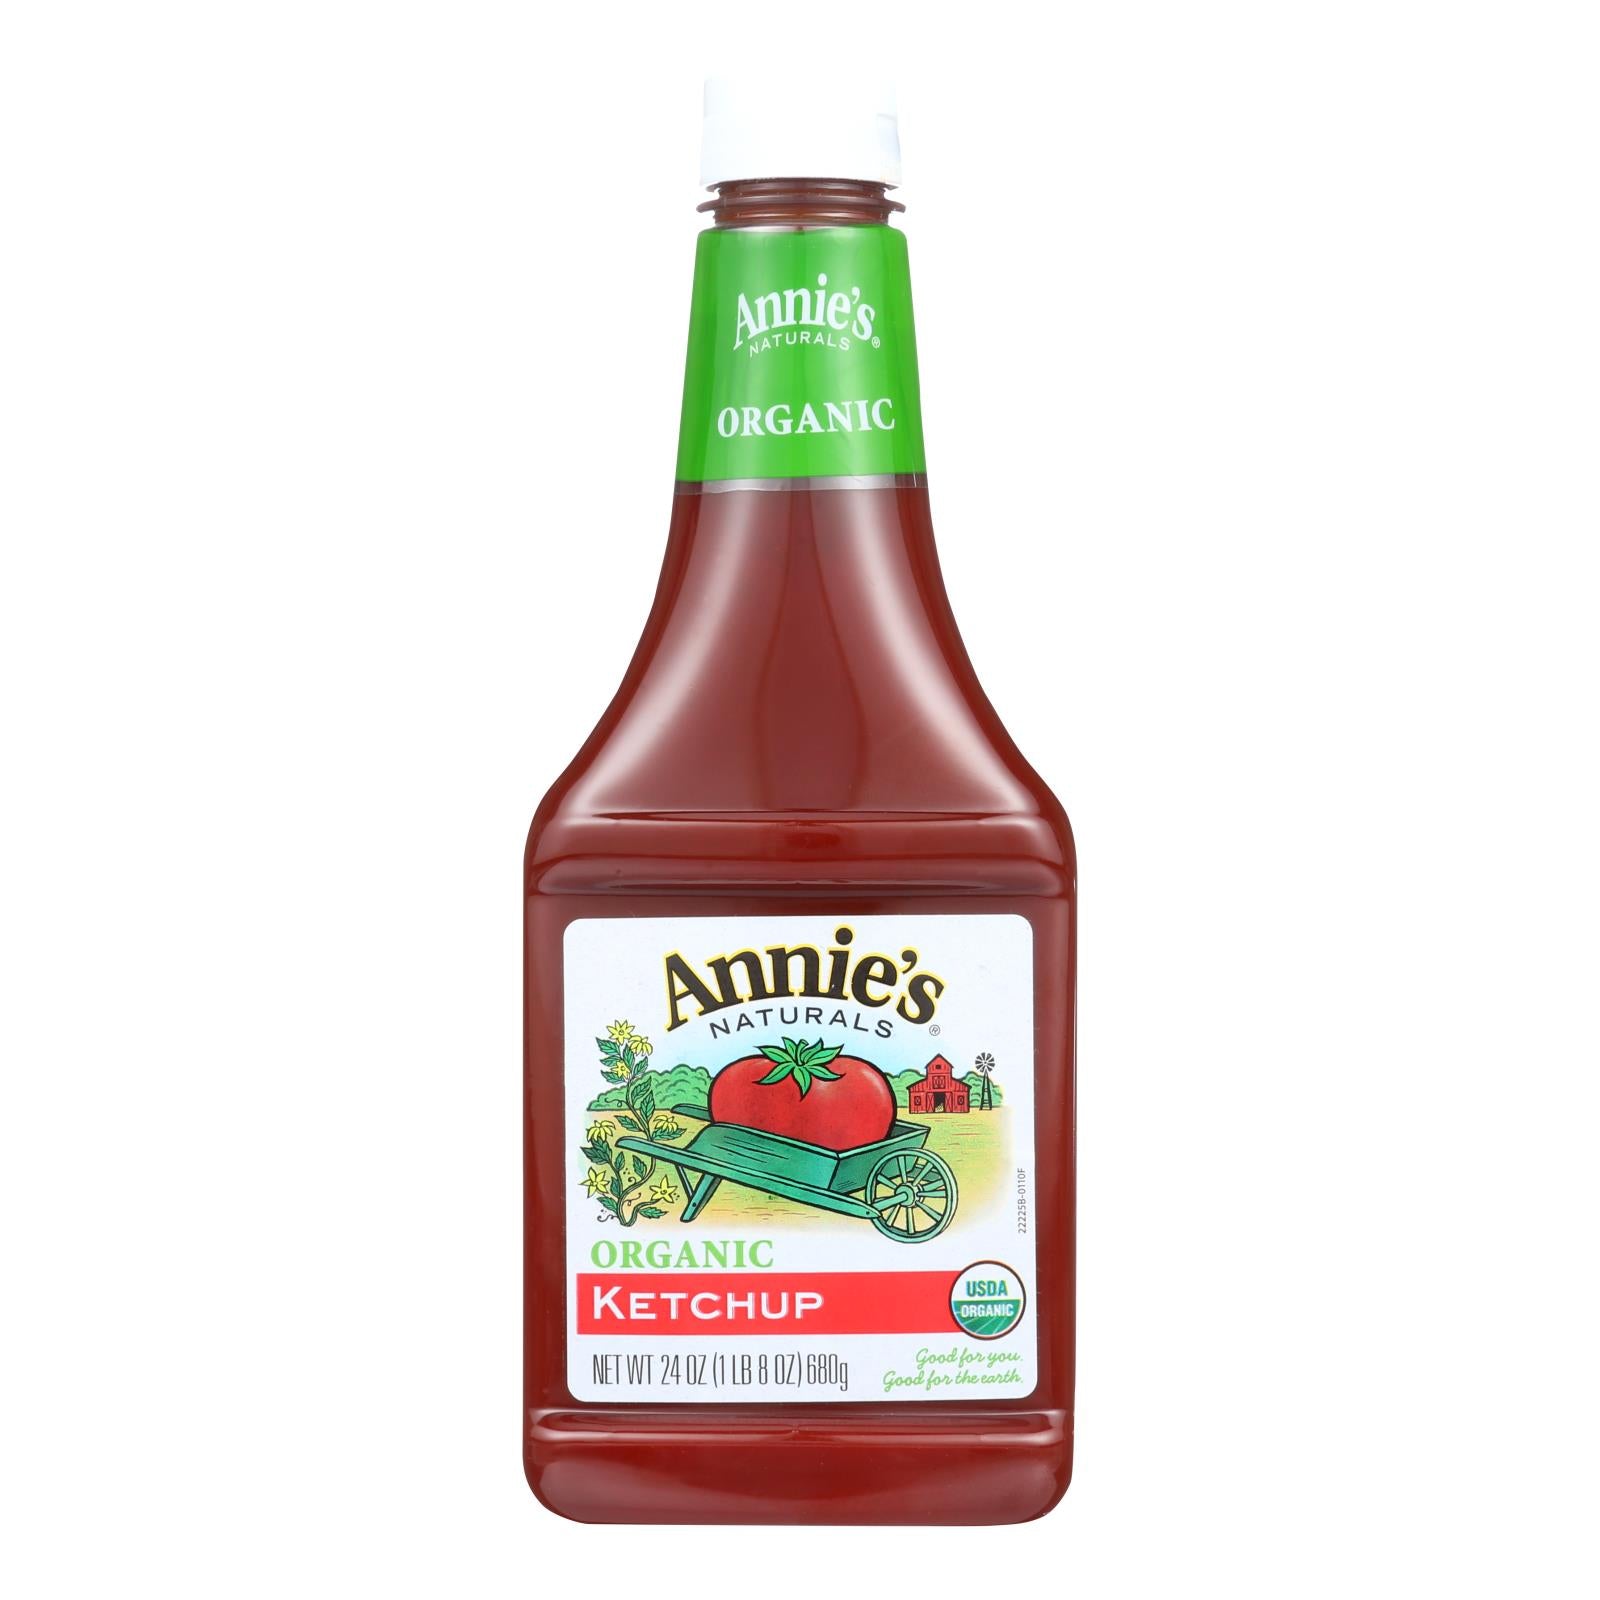 Annie'S Naturals, Annie's Naturals Organic Ketchup - Case of 12 - 24 oz. (Pack of 12)